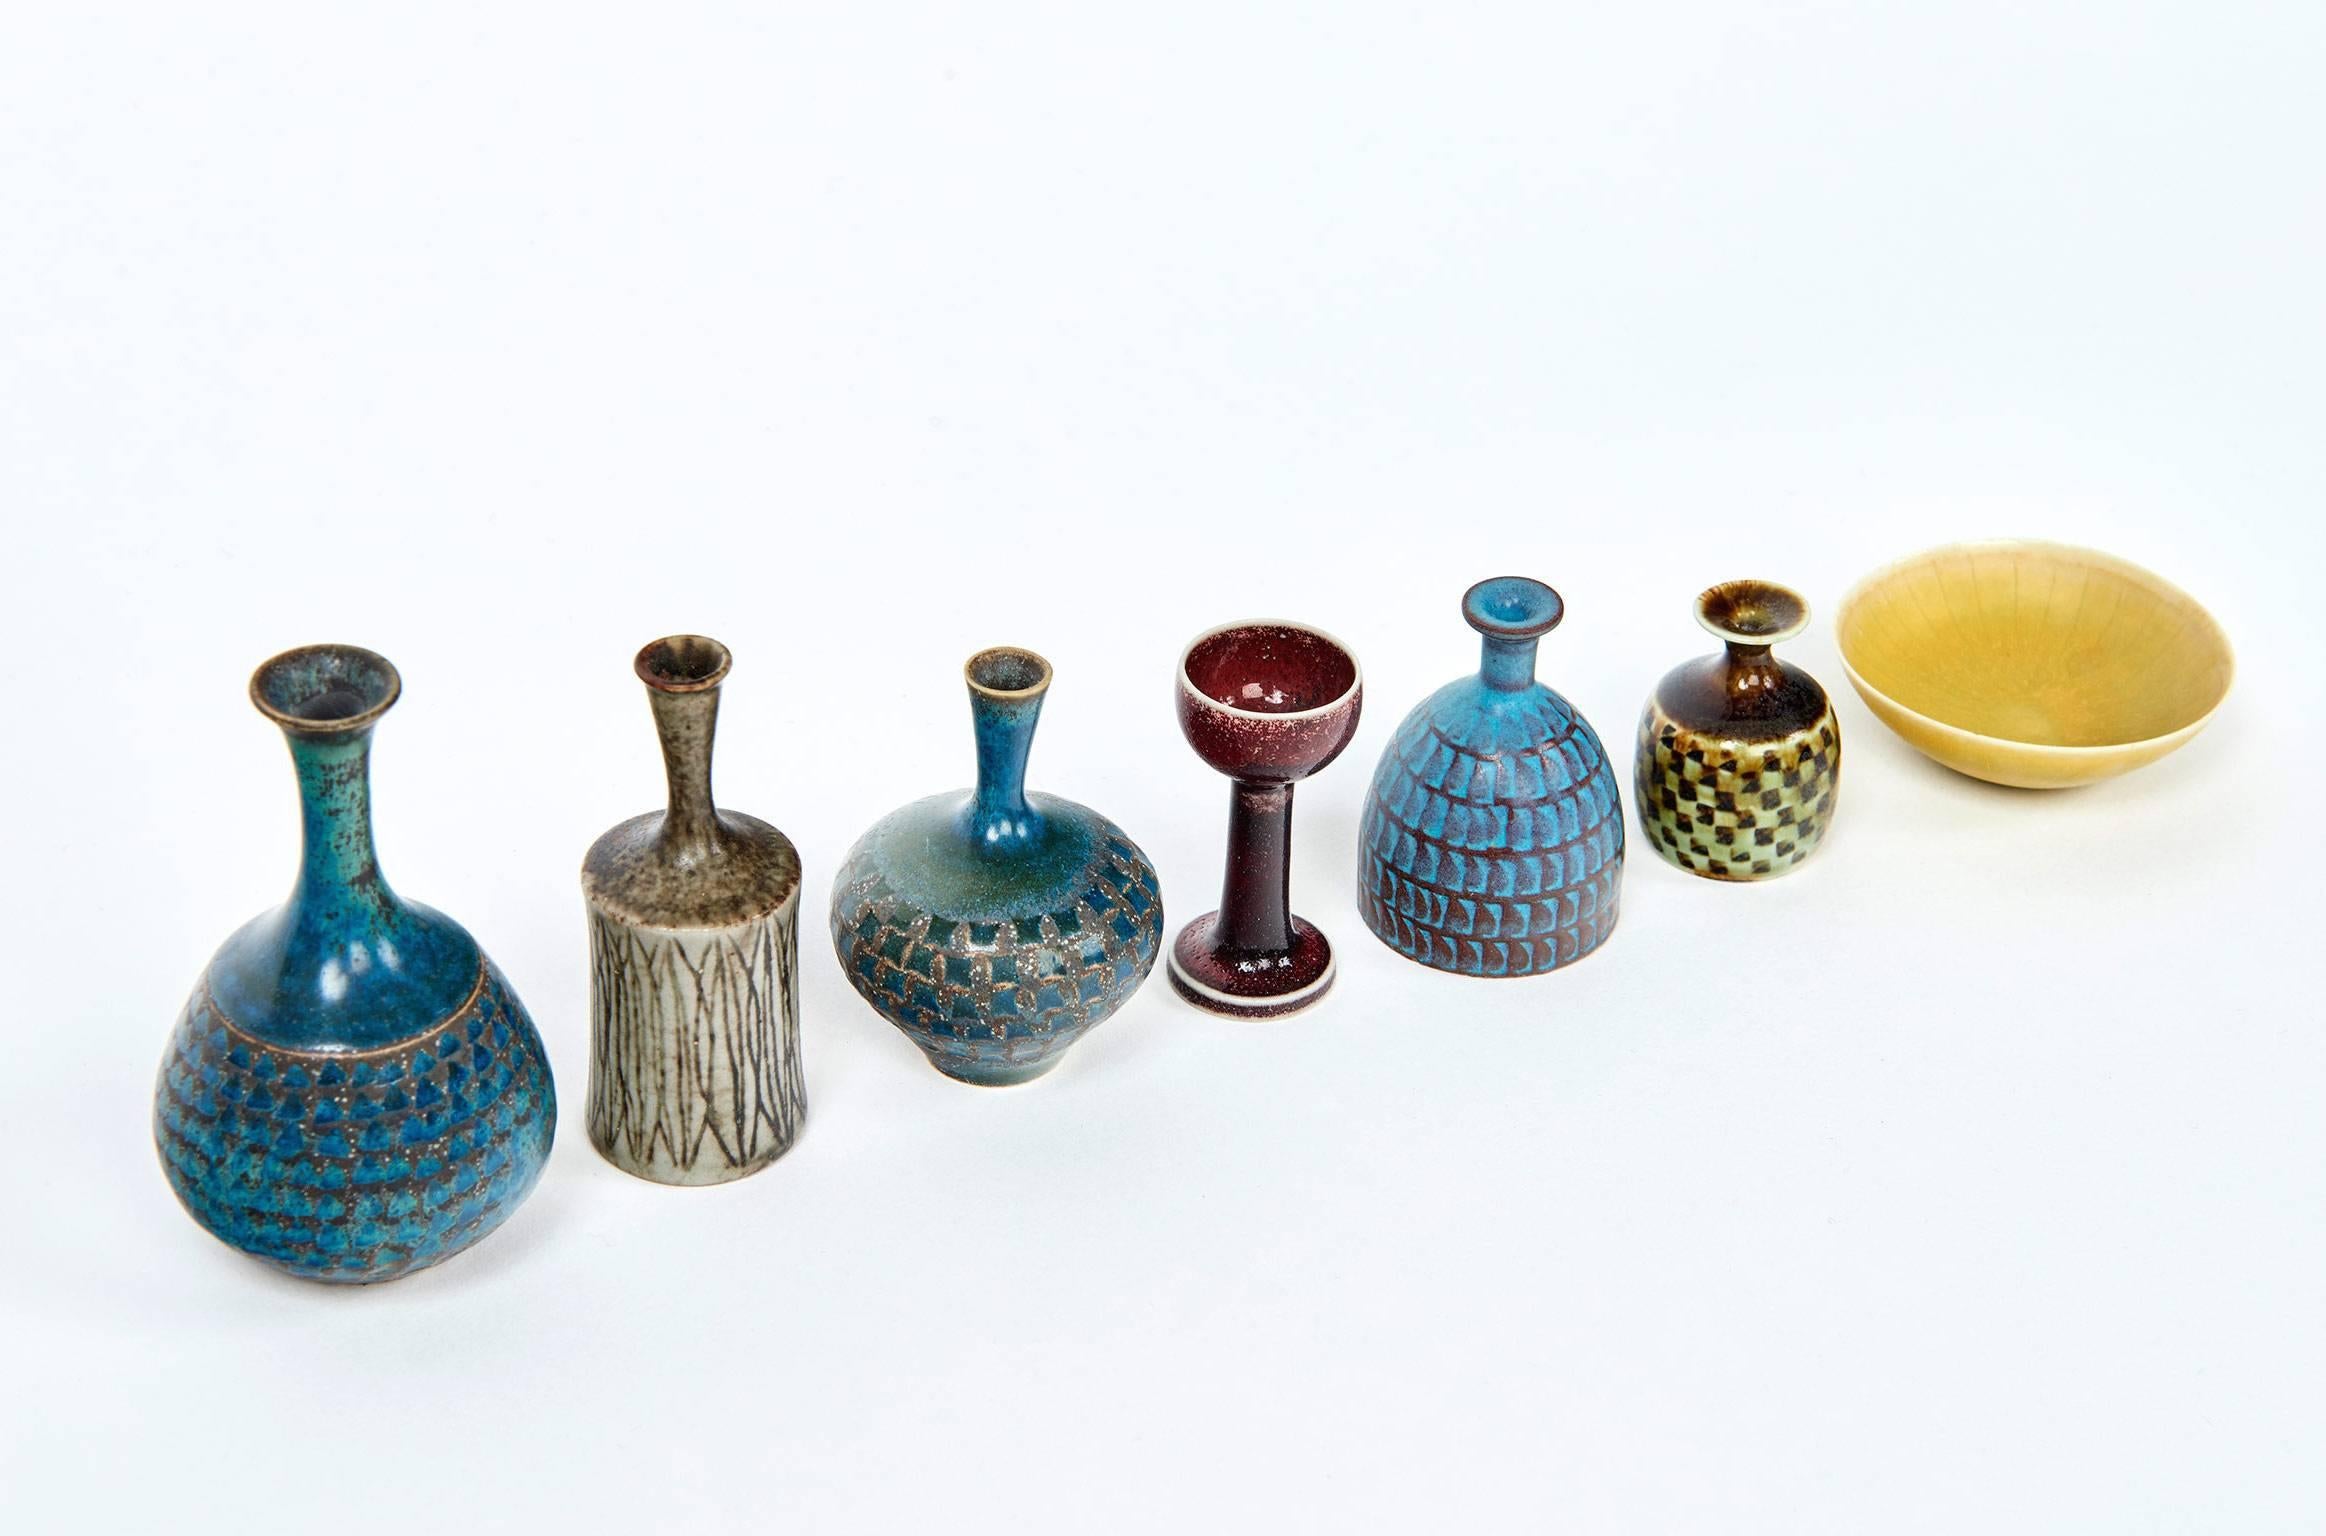 Collection of Seven Miniature Vessels by Stig Lindberg 1